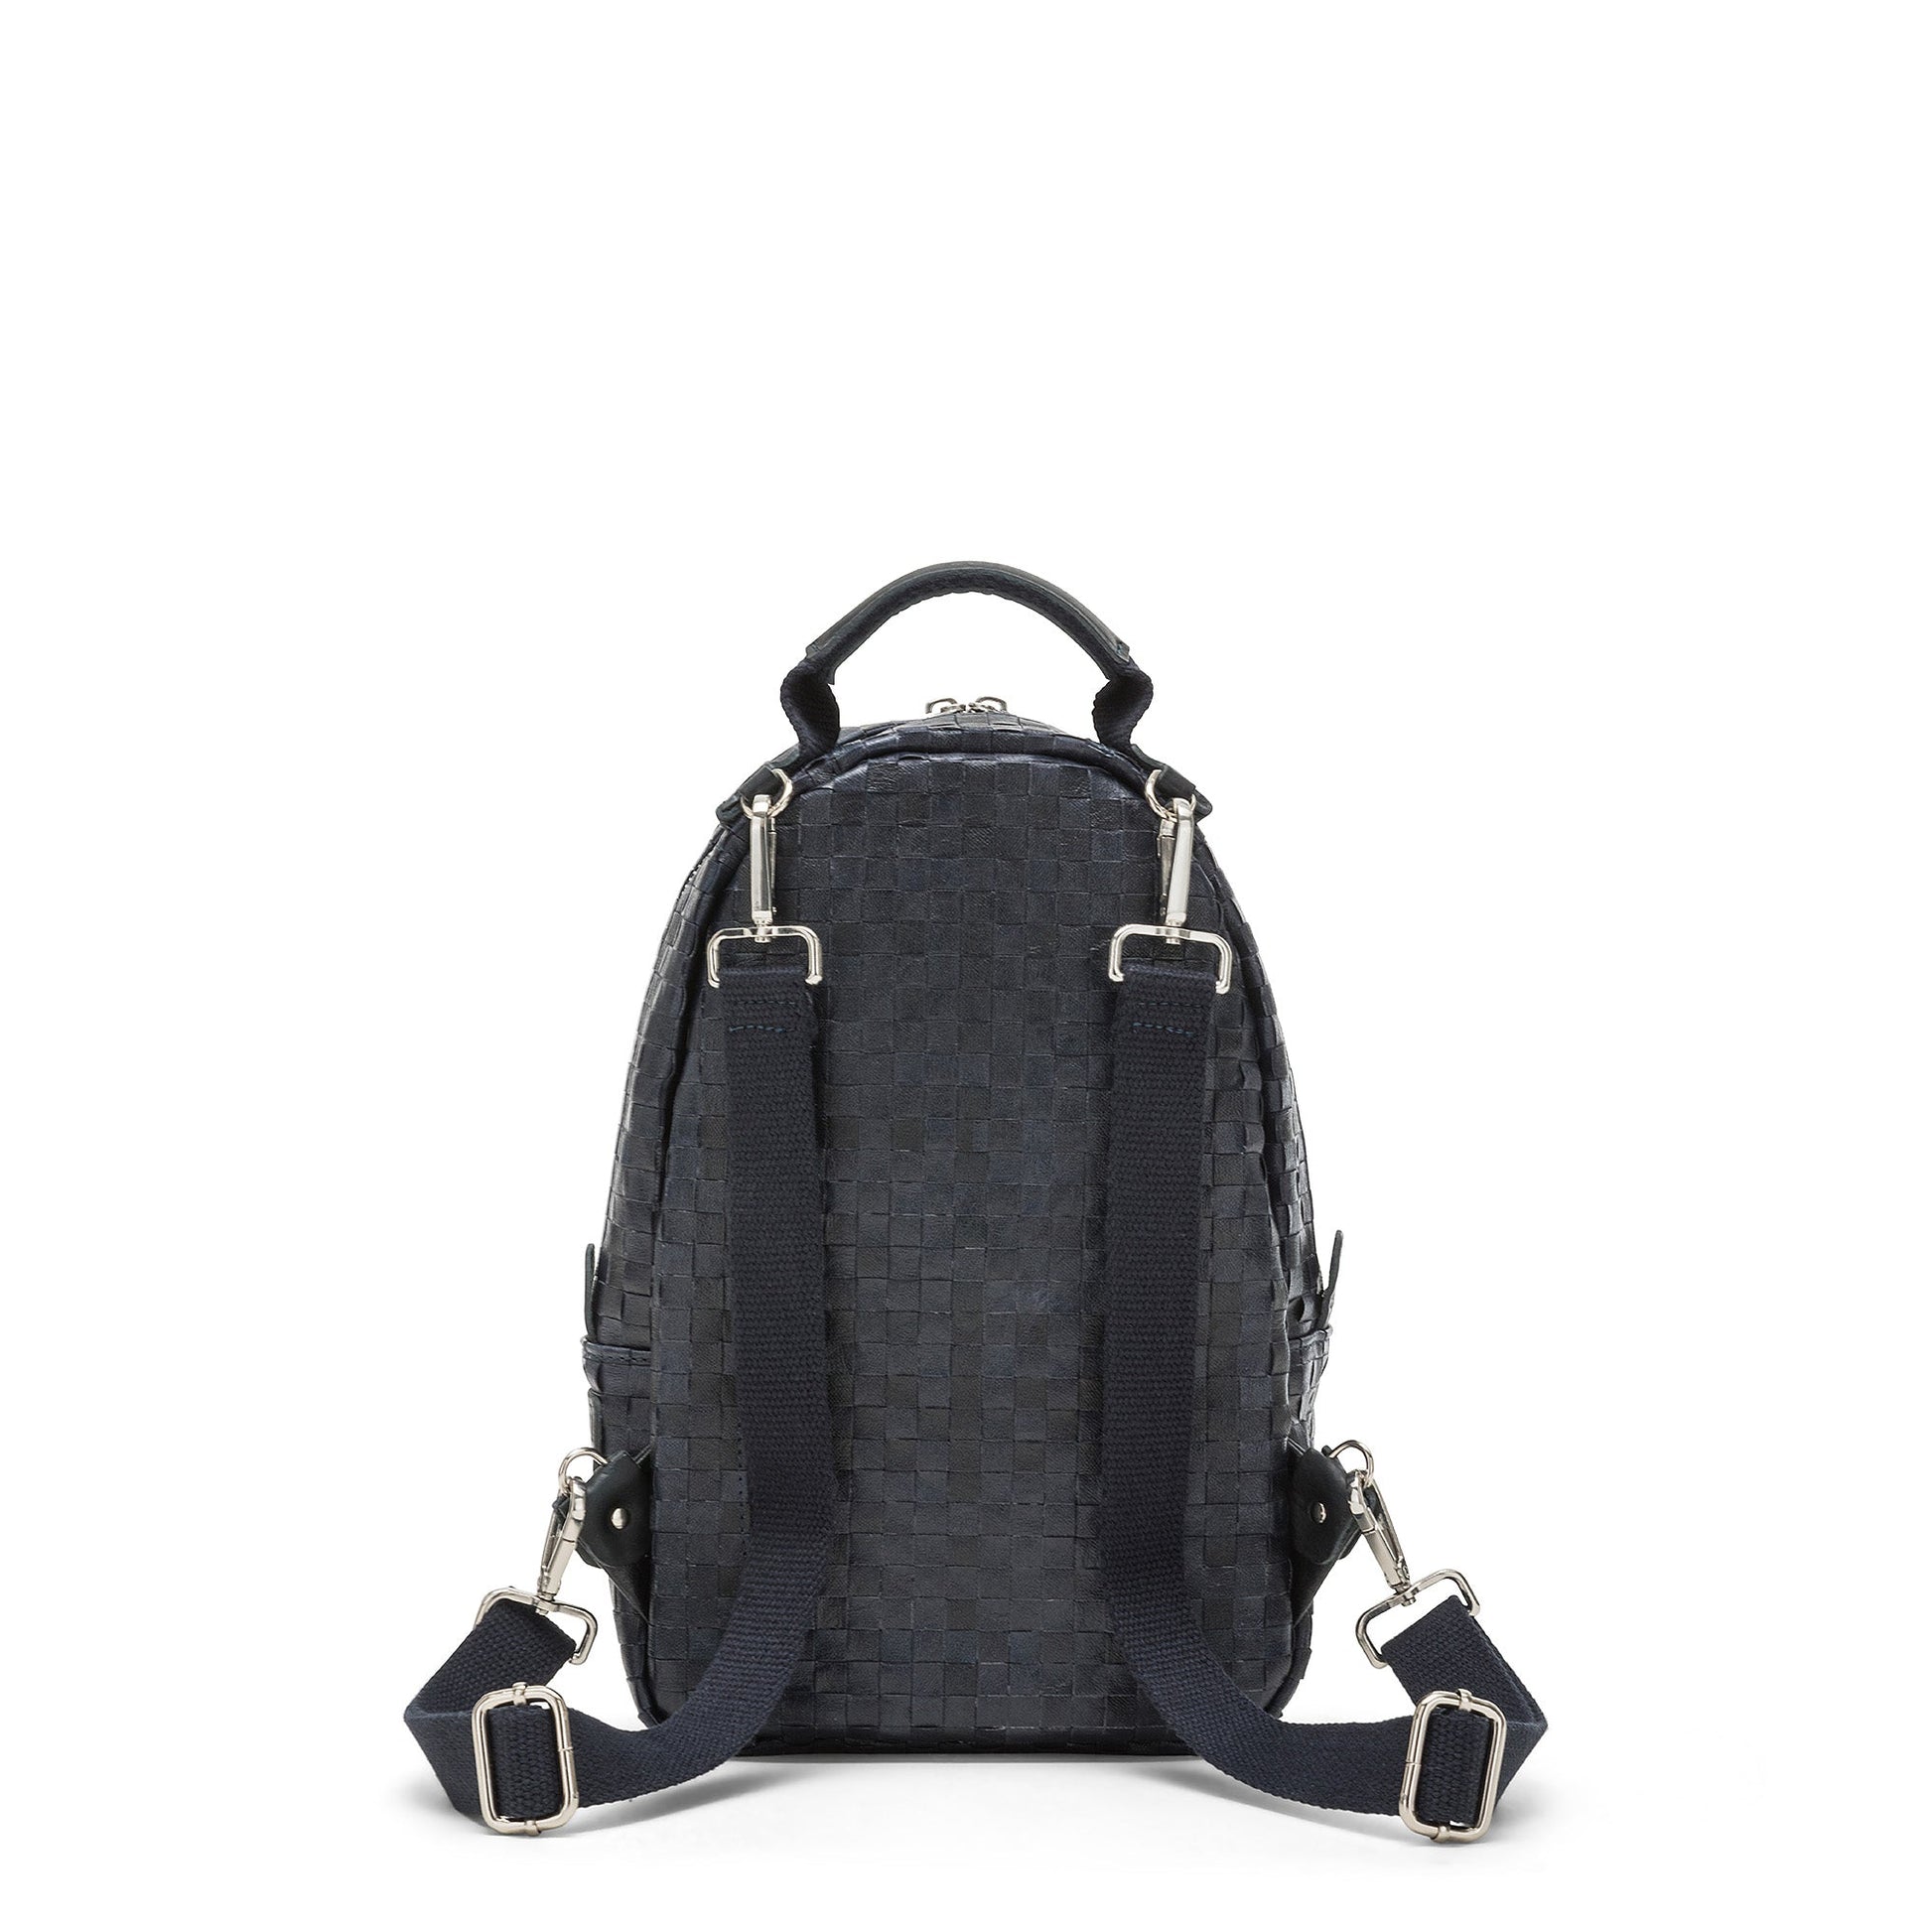 A navy washable paper woven backpack is shown from the back, with a top handle, brass hardware, two long shoulder straps and a gold zip pocket at rear.